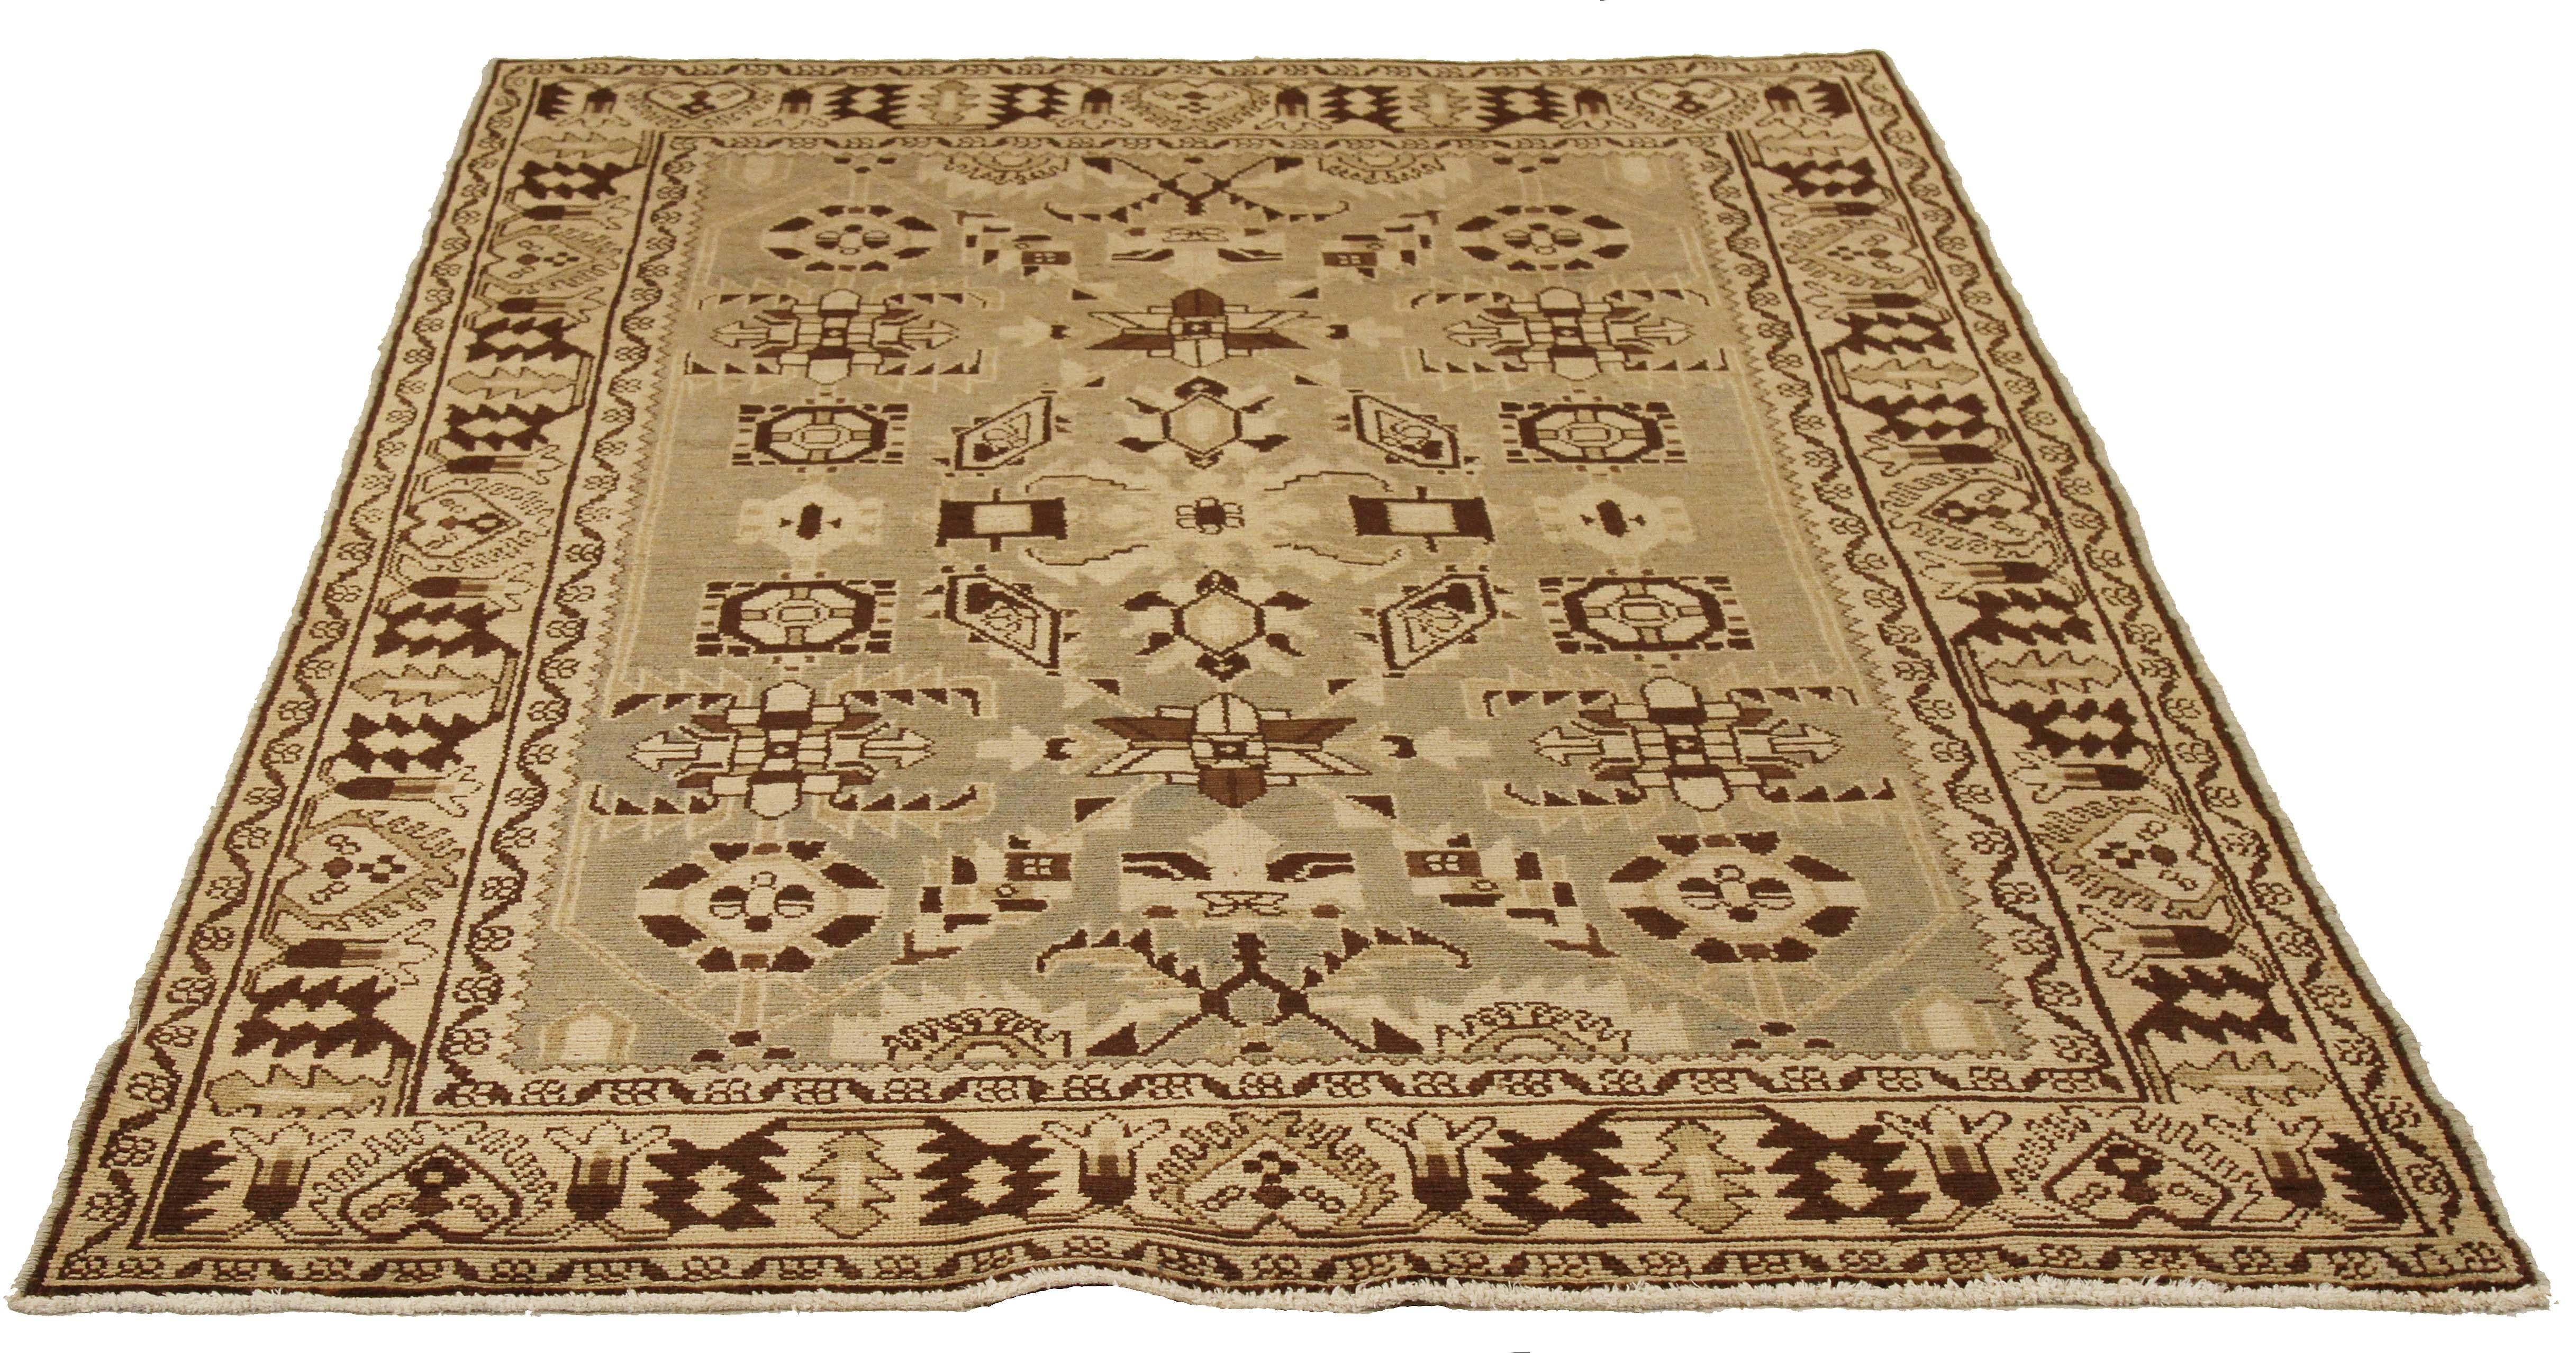 Antique Persian runner rug handwoven from the finest sheep’s wool and colored with all-natural vegetable dyes that are safe for humans and pets. It’s a traditional Malayer design featuring brown and ivory tribal details over a beige field. It’s a